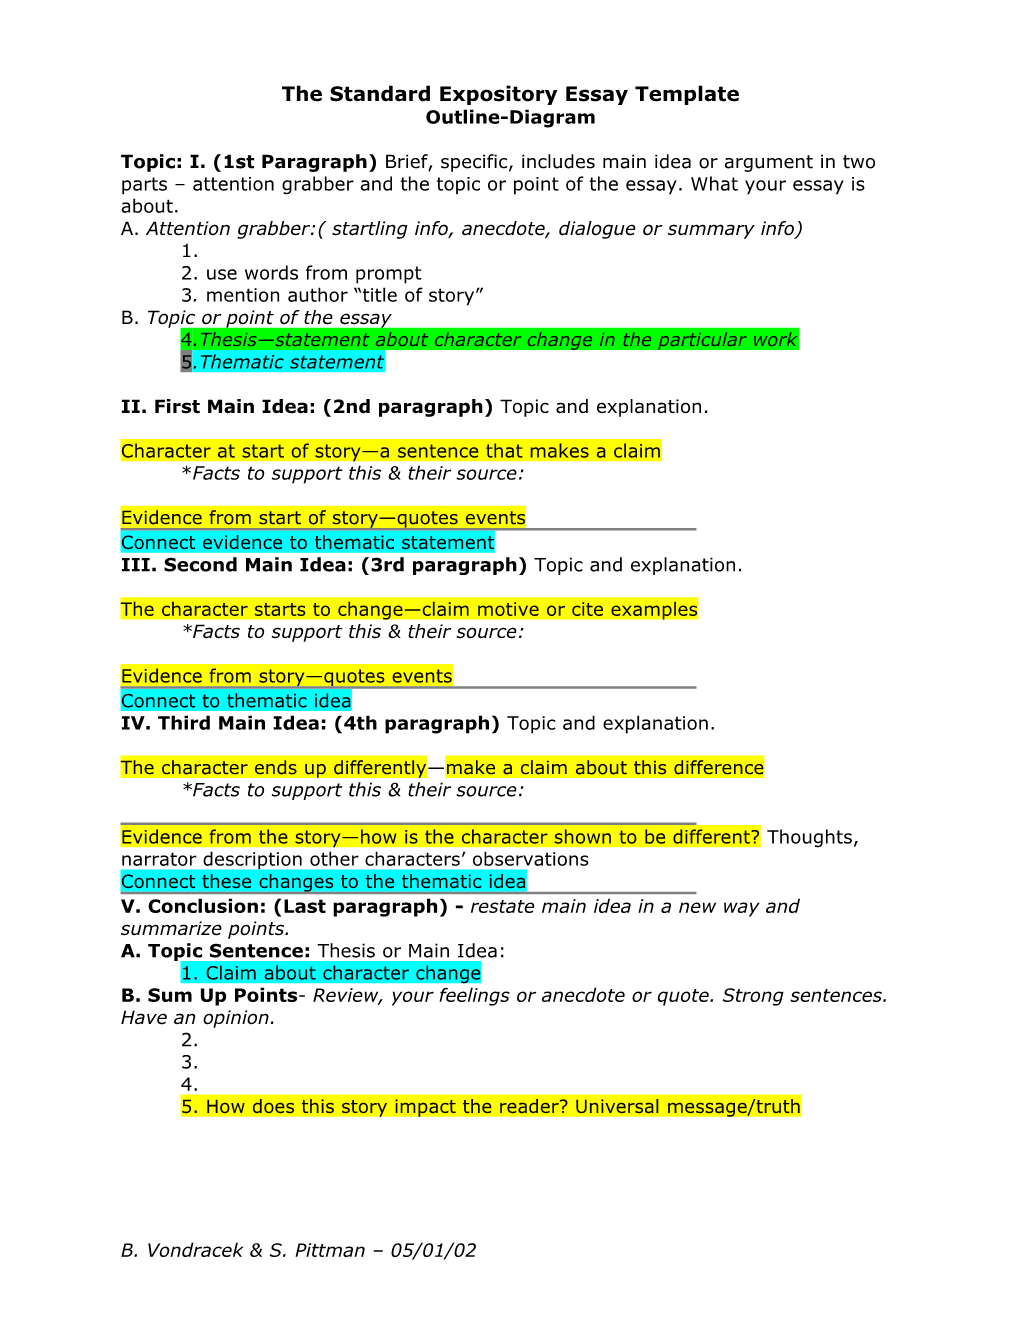 The Standard Expository Essay Template